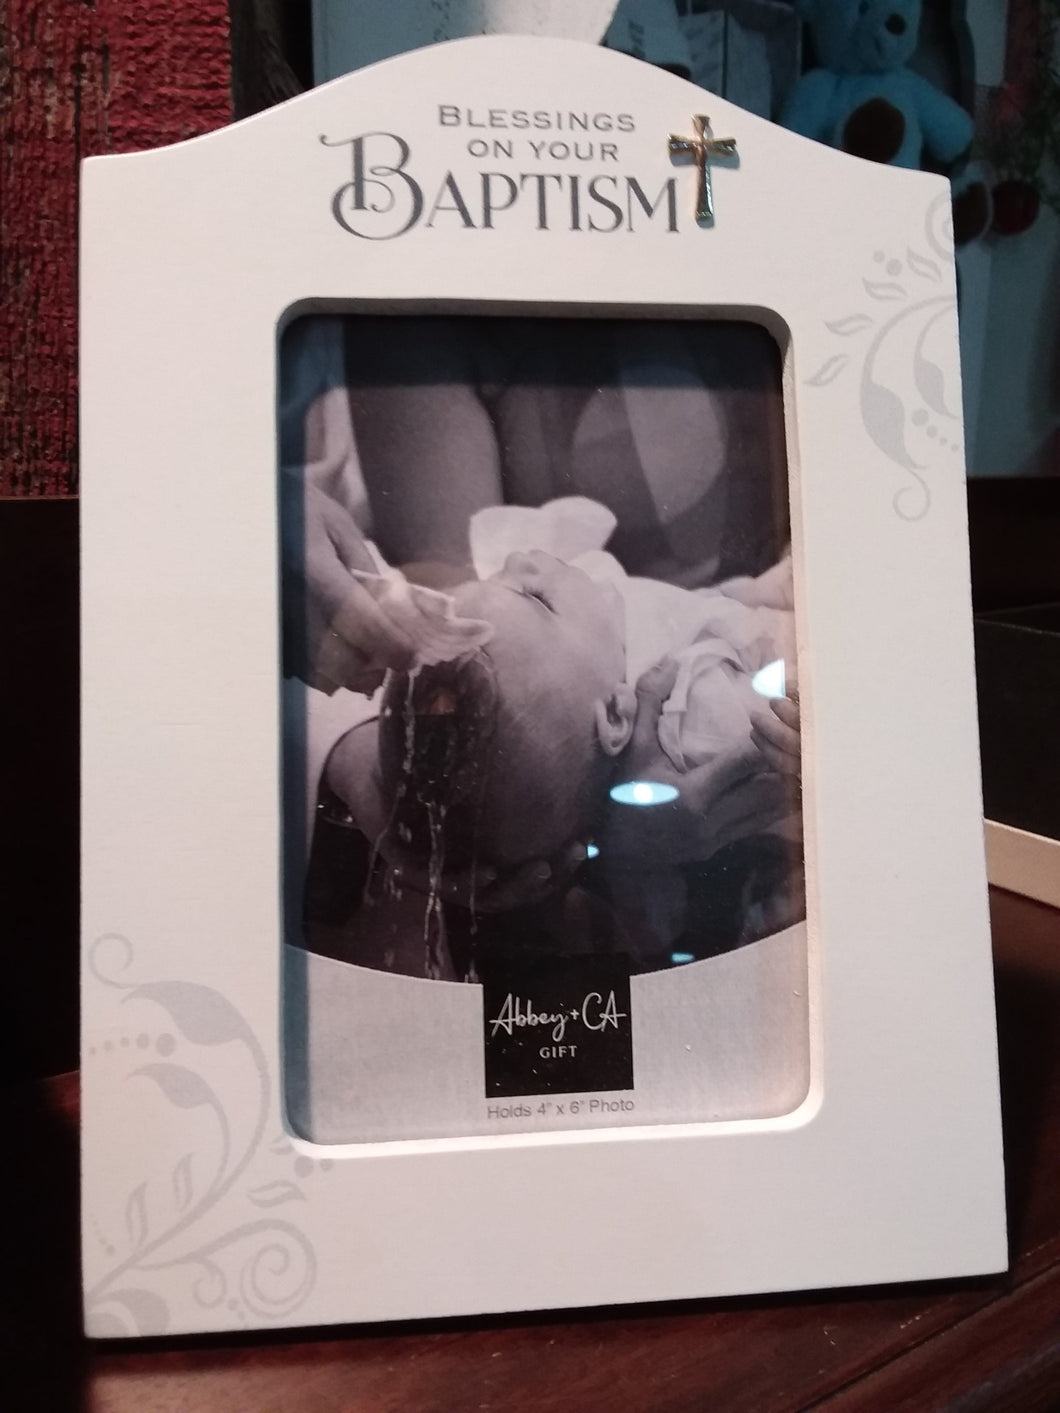 Frame-Blessings On Your Baptism (Holds 4 x 6 Photo) - White